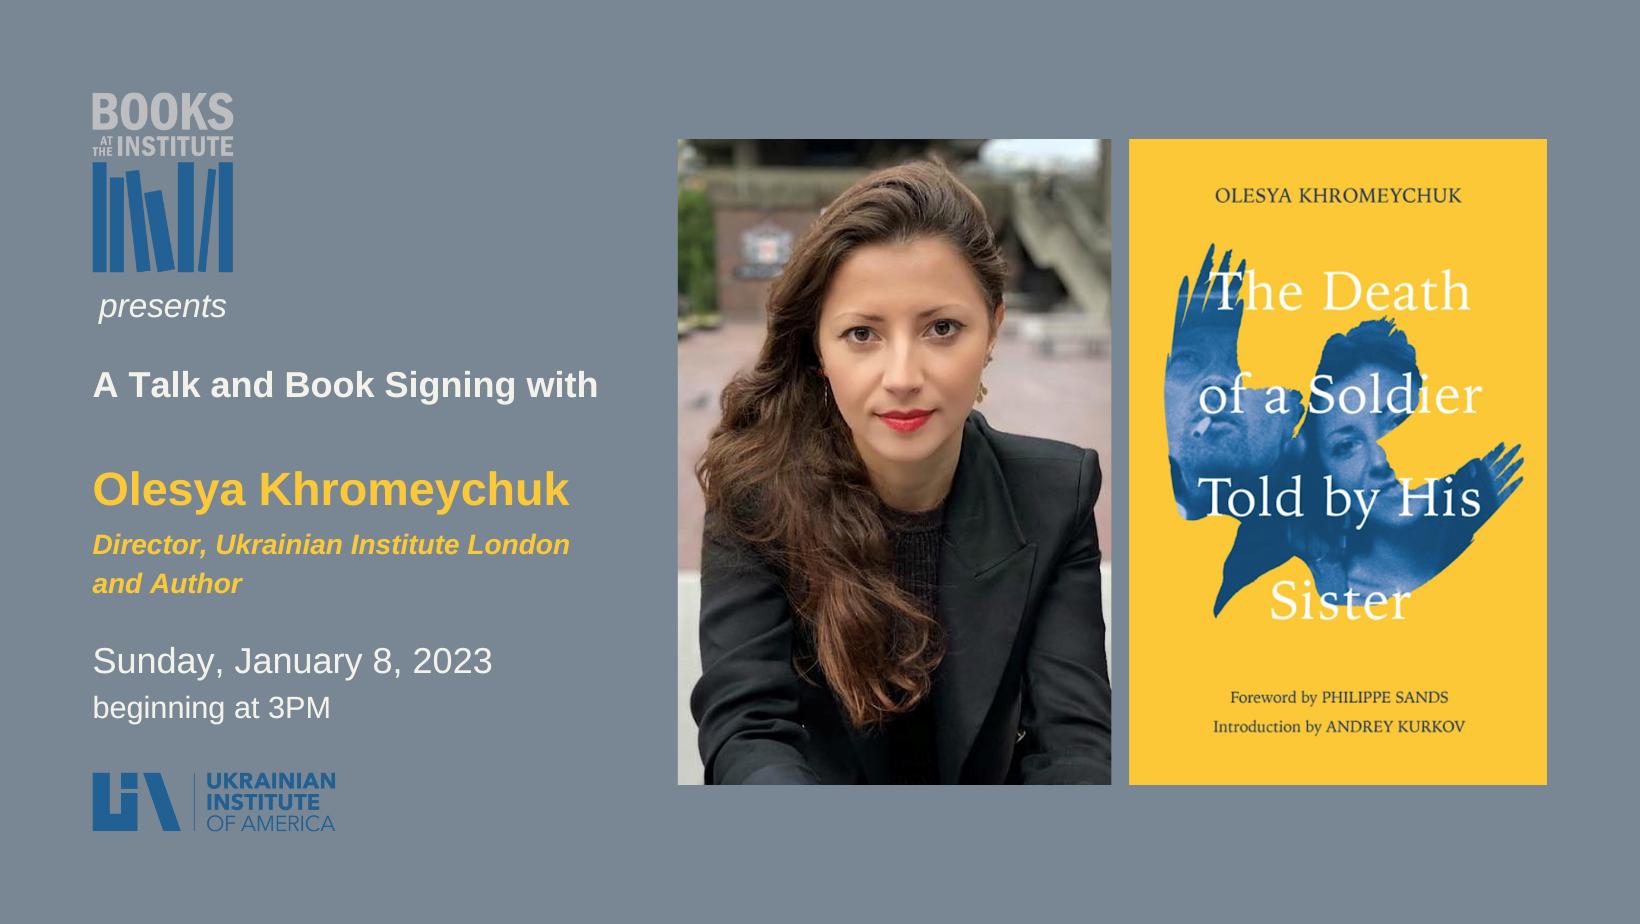 A Talk and Book Signing with Olesya Khromeychuk